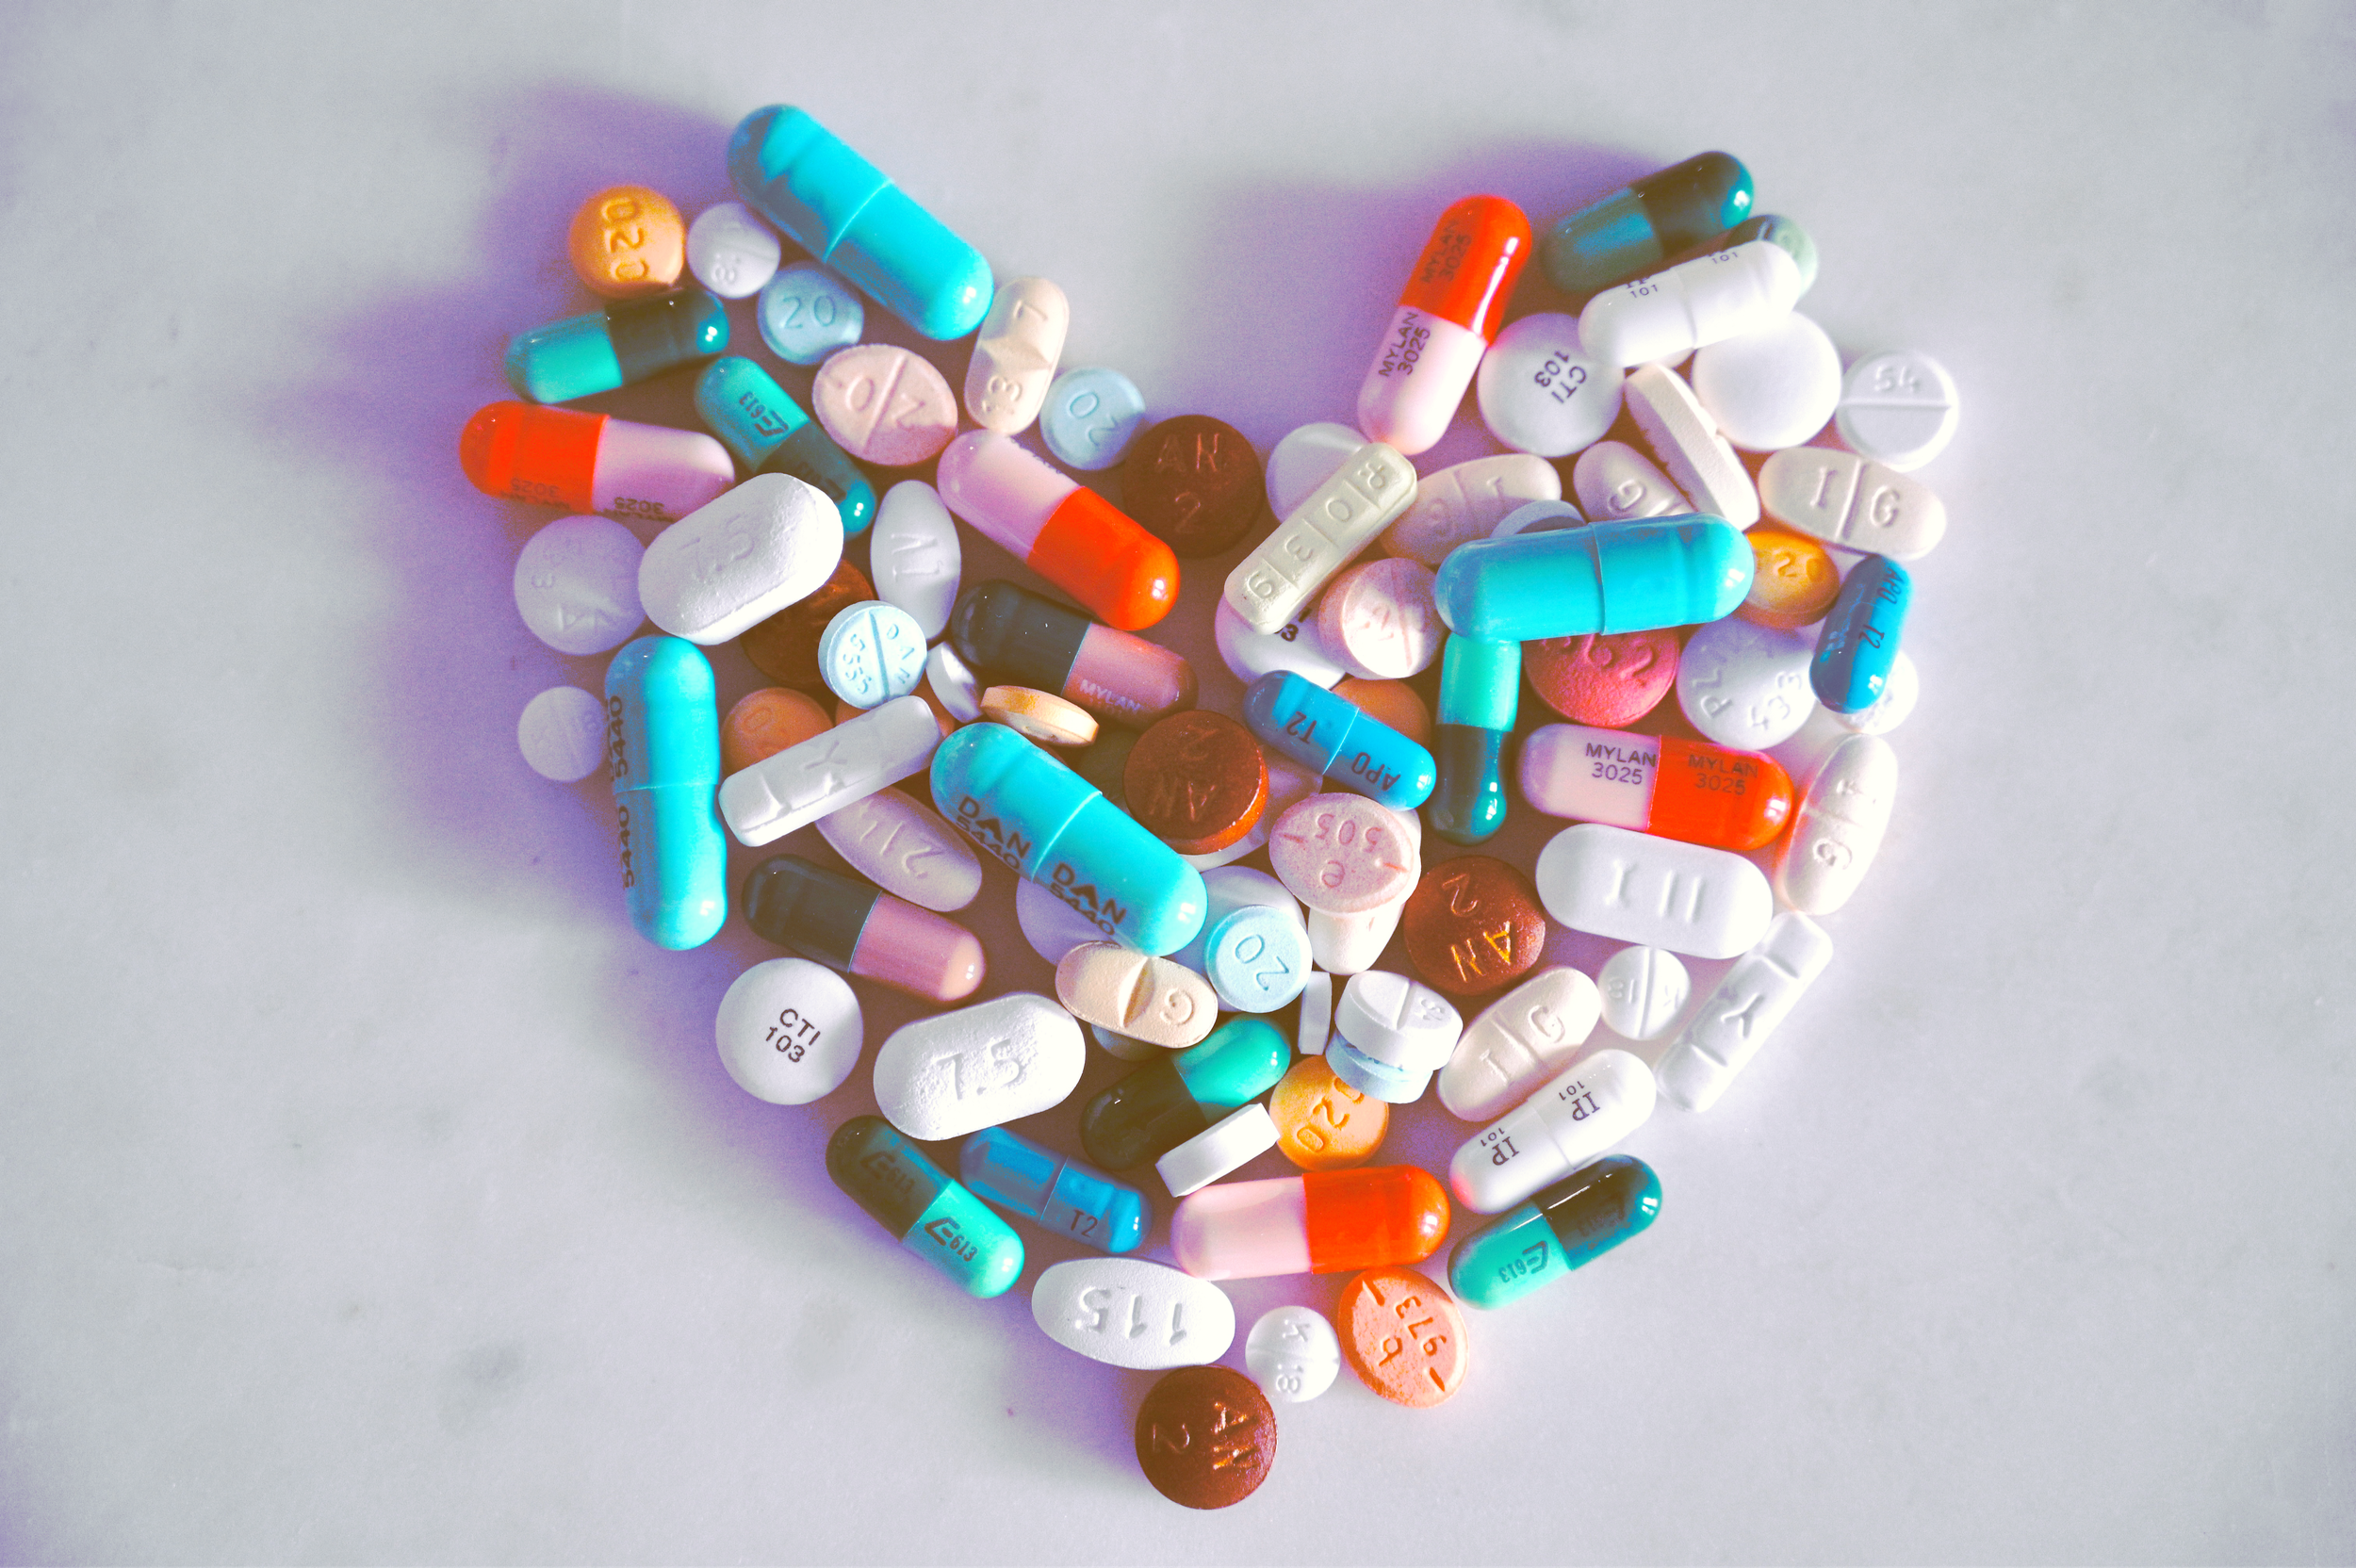 Pile Of Pills - Pile Of Pills Png PNG Image